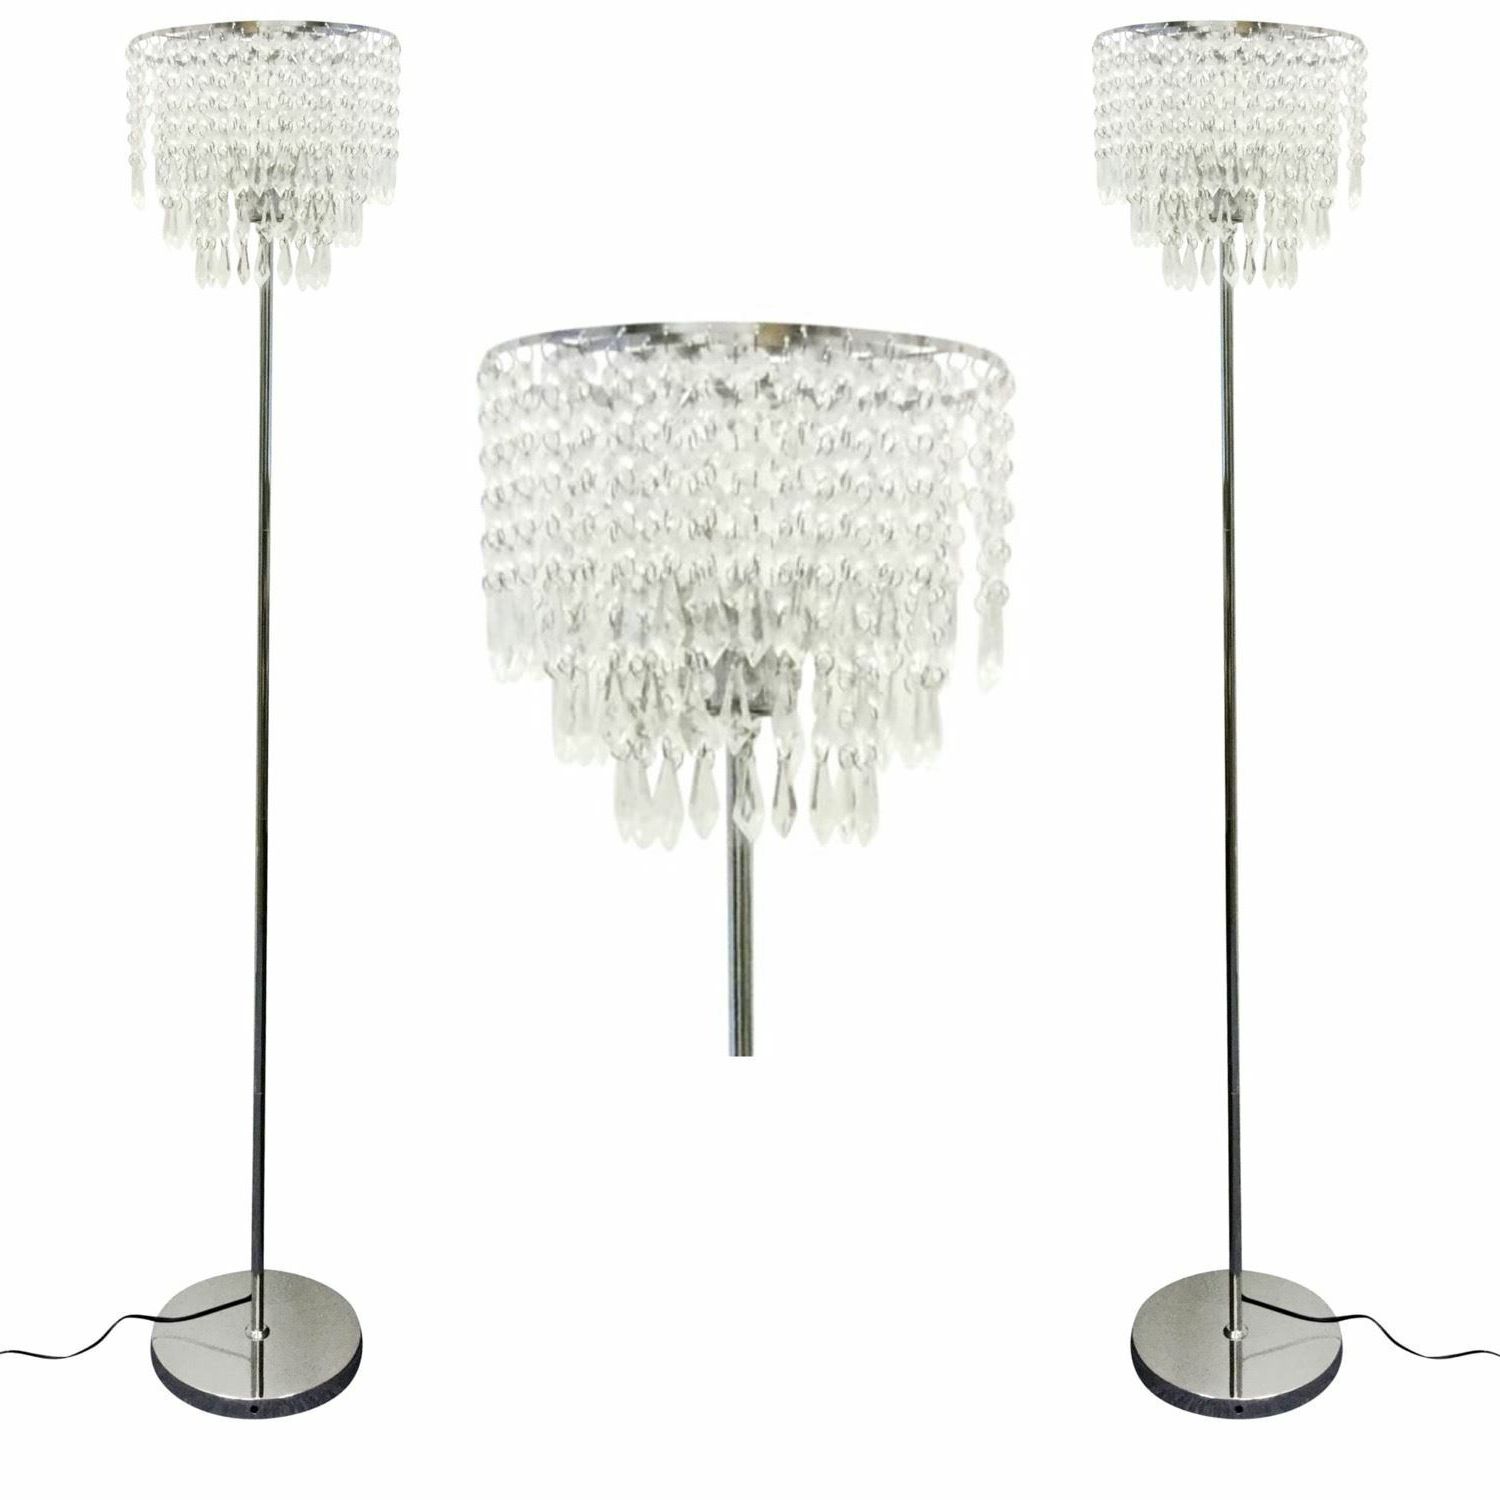 Set Of 2 Chrome Floor Lights Standard Lamps With Acrylic Crystal Jewelled  Shades 5056367101480 | Ebay With Chrome Floor Lamps (View 18 of 20)